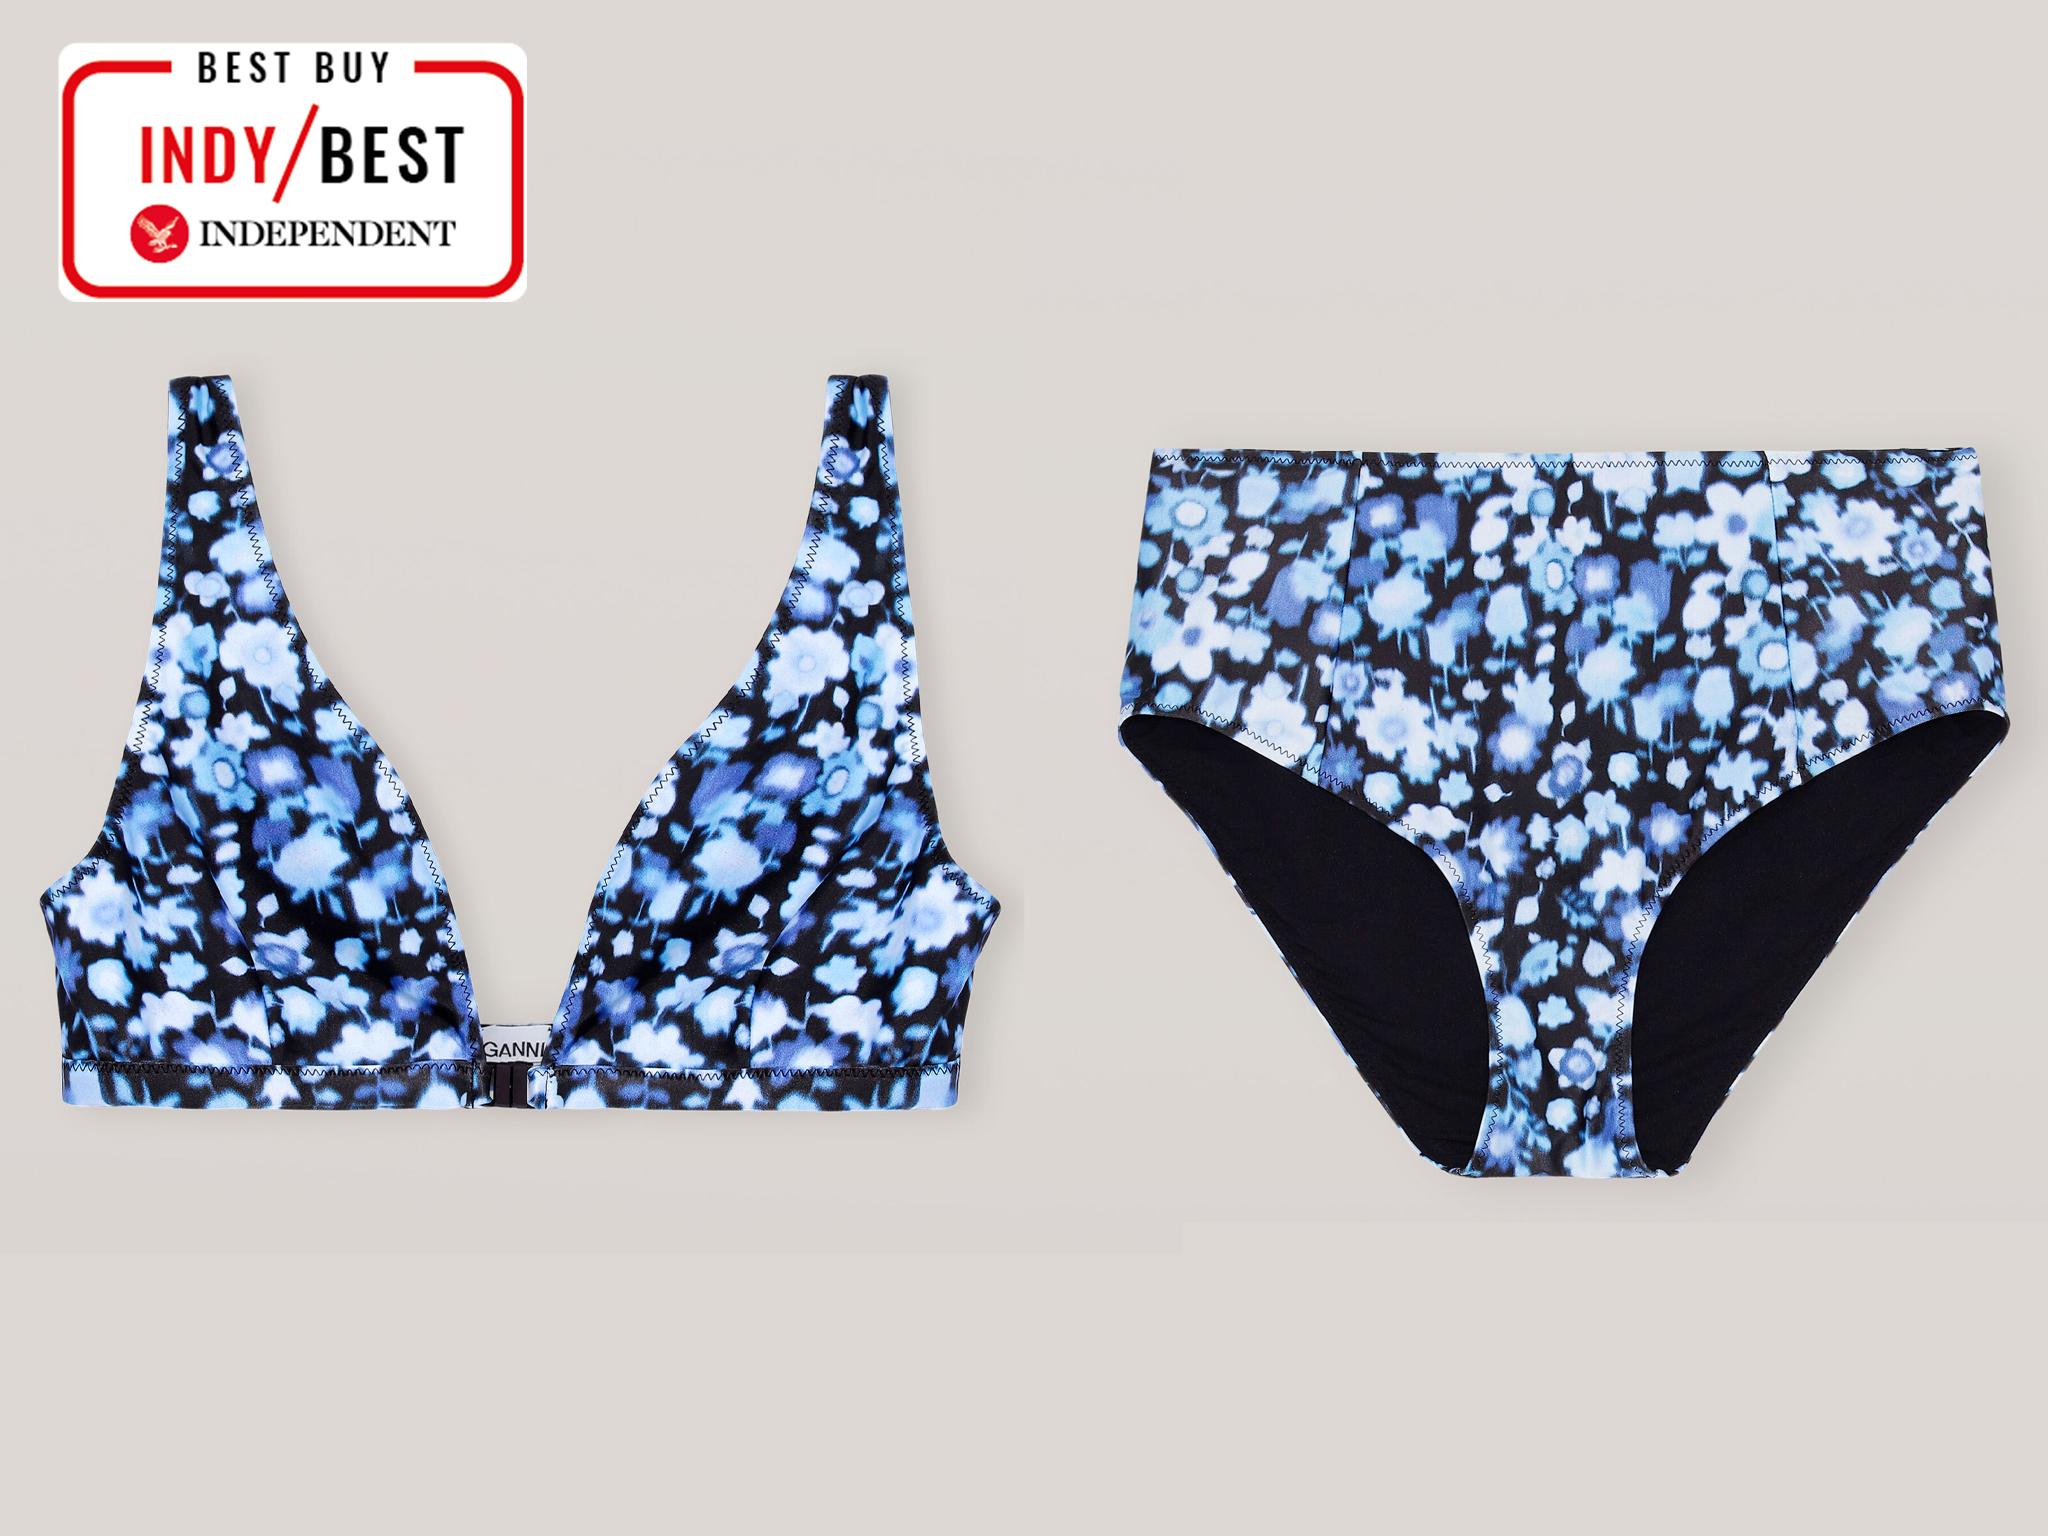 Best bikinis: From high waisted sets to triangle styles